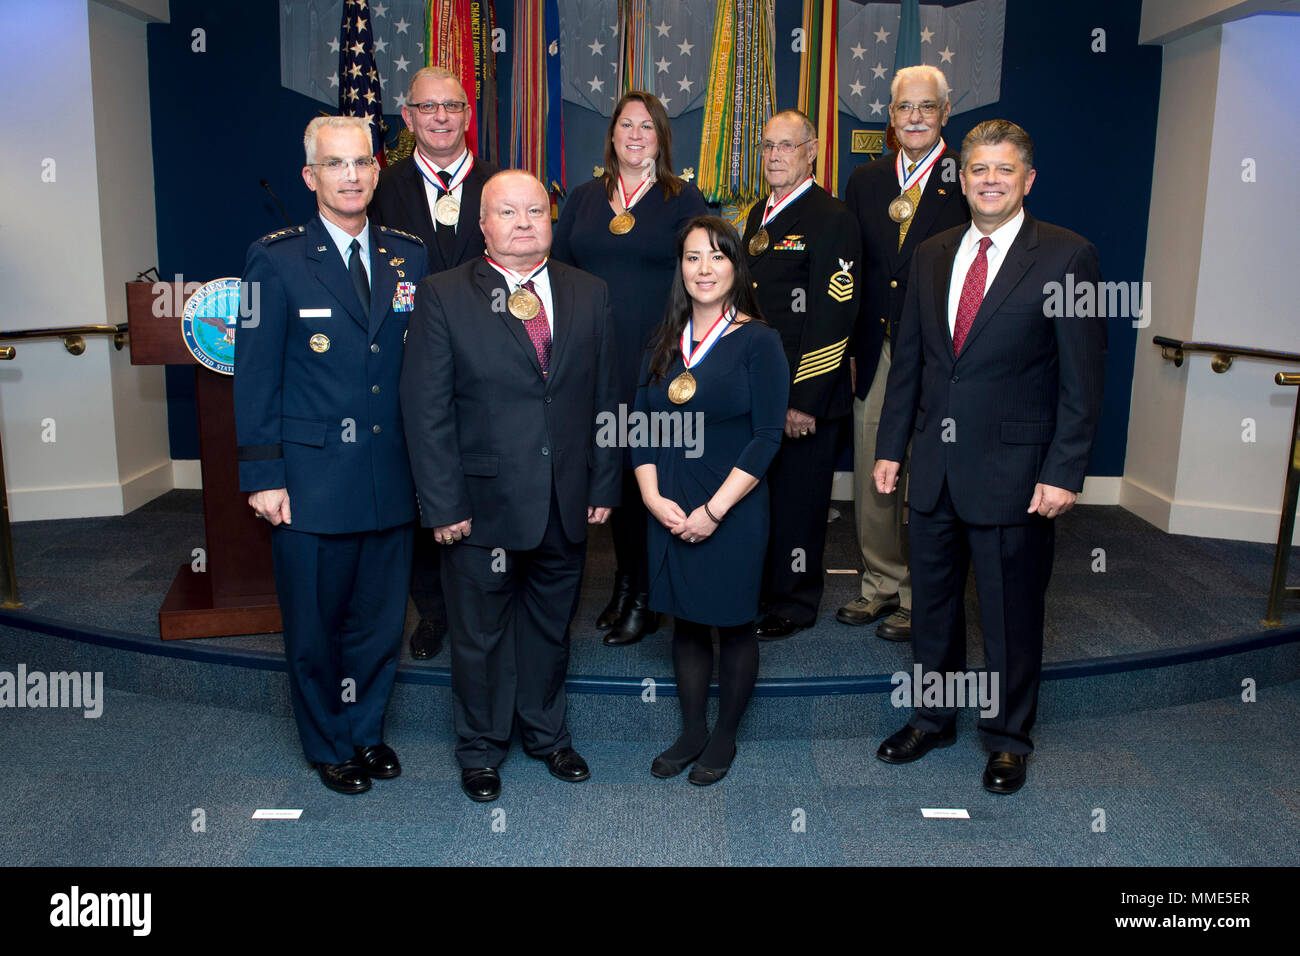 Recipients of The Spirit of Hope Award stand for a photograph with Vice Chairman of the Joint Chiefs of Staff Gen. Paul Selva, front left, and Michael Rhodes, director of administration at the Office of the Deputy Chief Management Officer, front right, after the awards presentation at the Pentagon in Arlington, Va. Oct. 26, 2017. The recipients are in front from left Kevin Ou and Jennifer Correla, and in back from left, Robert Irvine, Ann O’Connor of Trees for Troops, Retired Chief Petty Officer Jim Marshall, and Richard Stone of Special Forces Home for Christmas Fund. Stock Photo